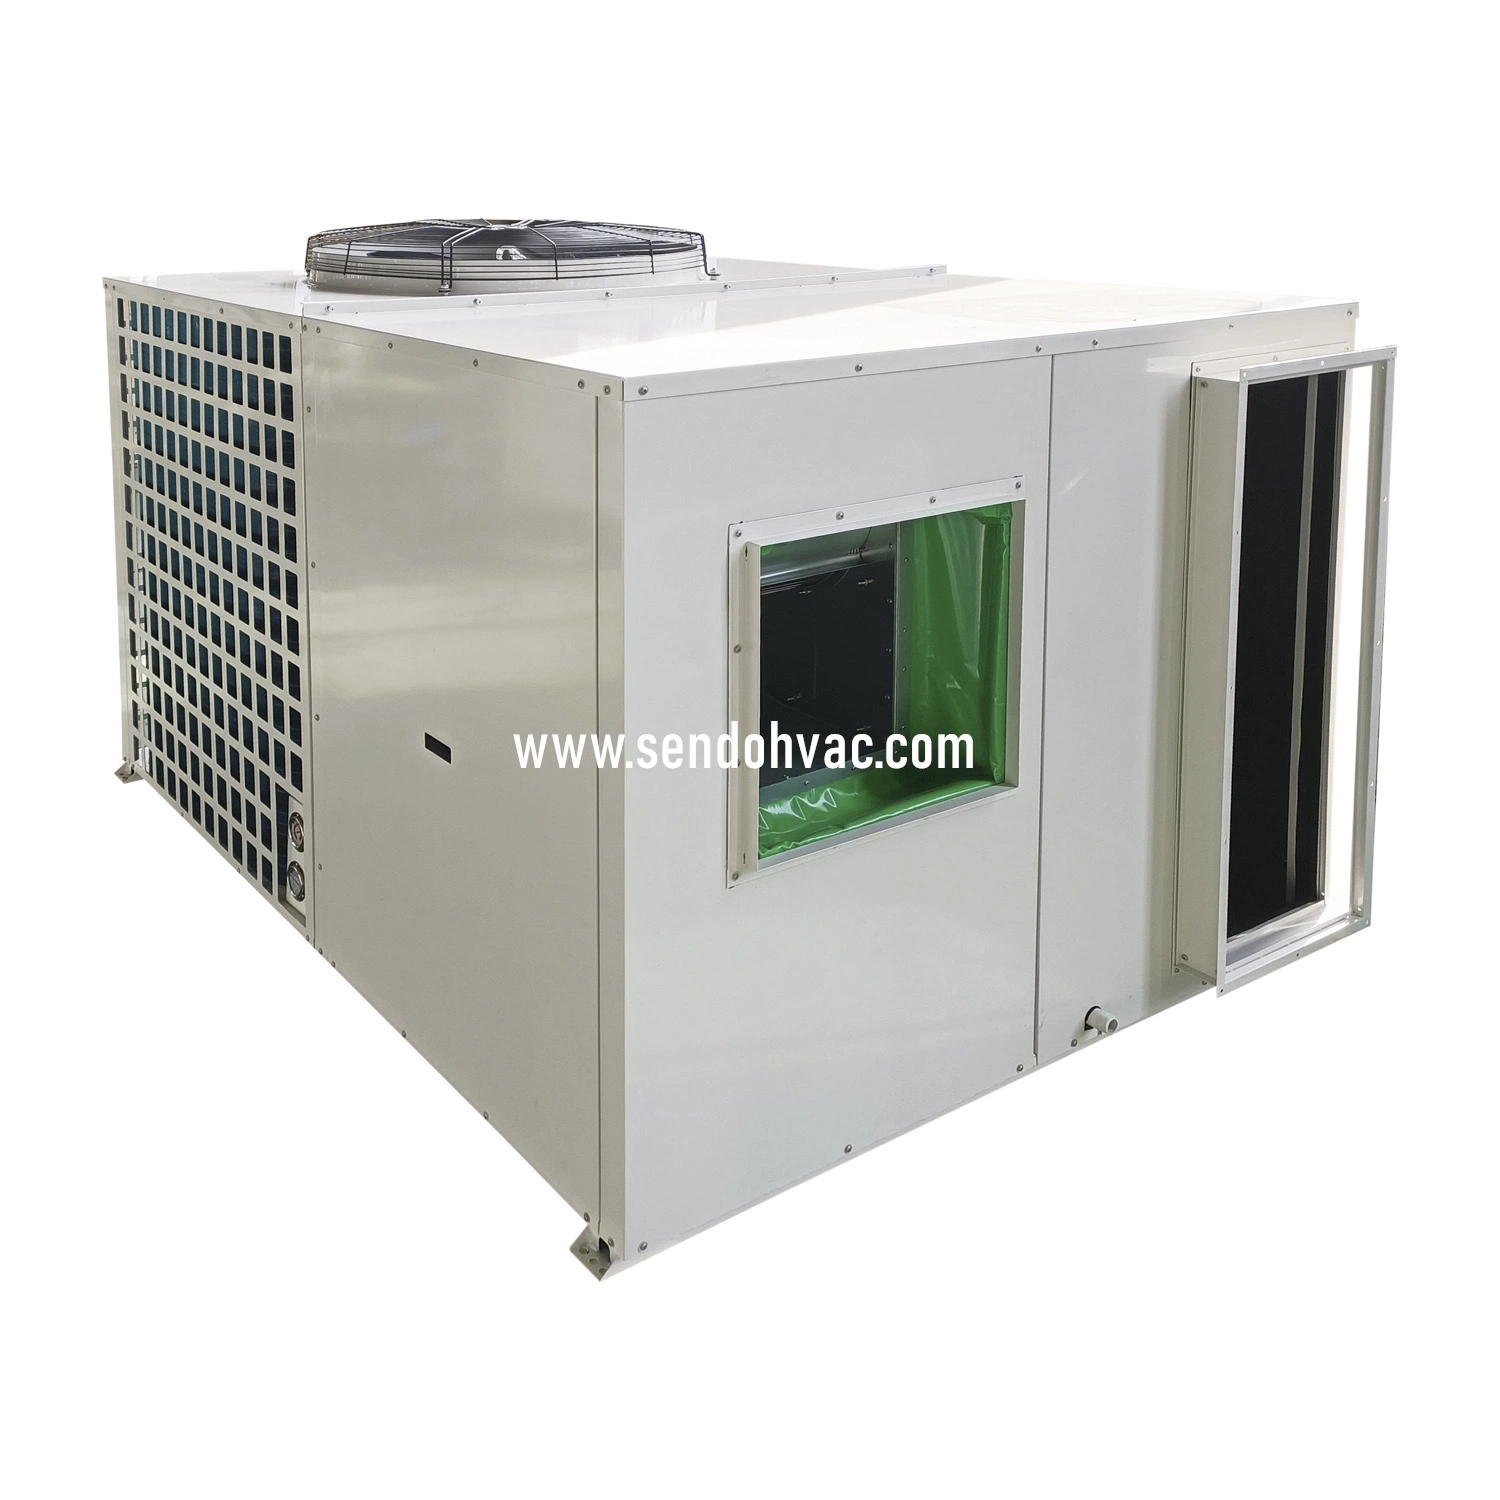 Commercial Industrial Air Cooled DC Inverter Type Rooftop Packaged Central Air Conditioner with Hitachi Inverter Scroll Compressors